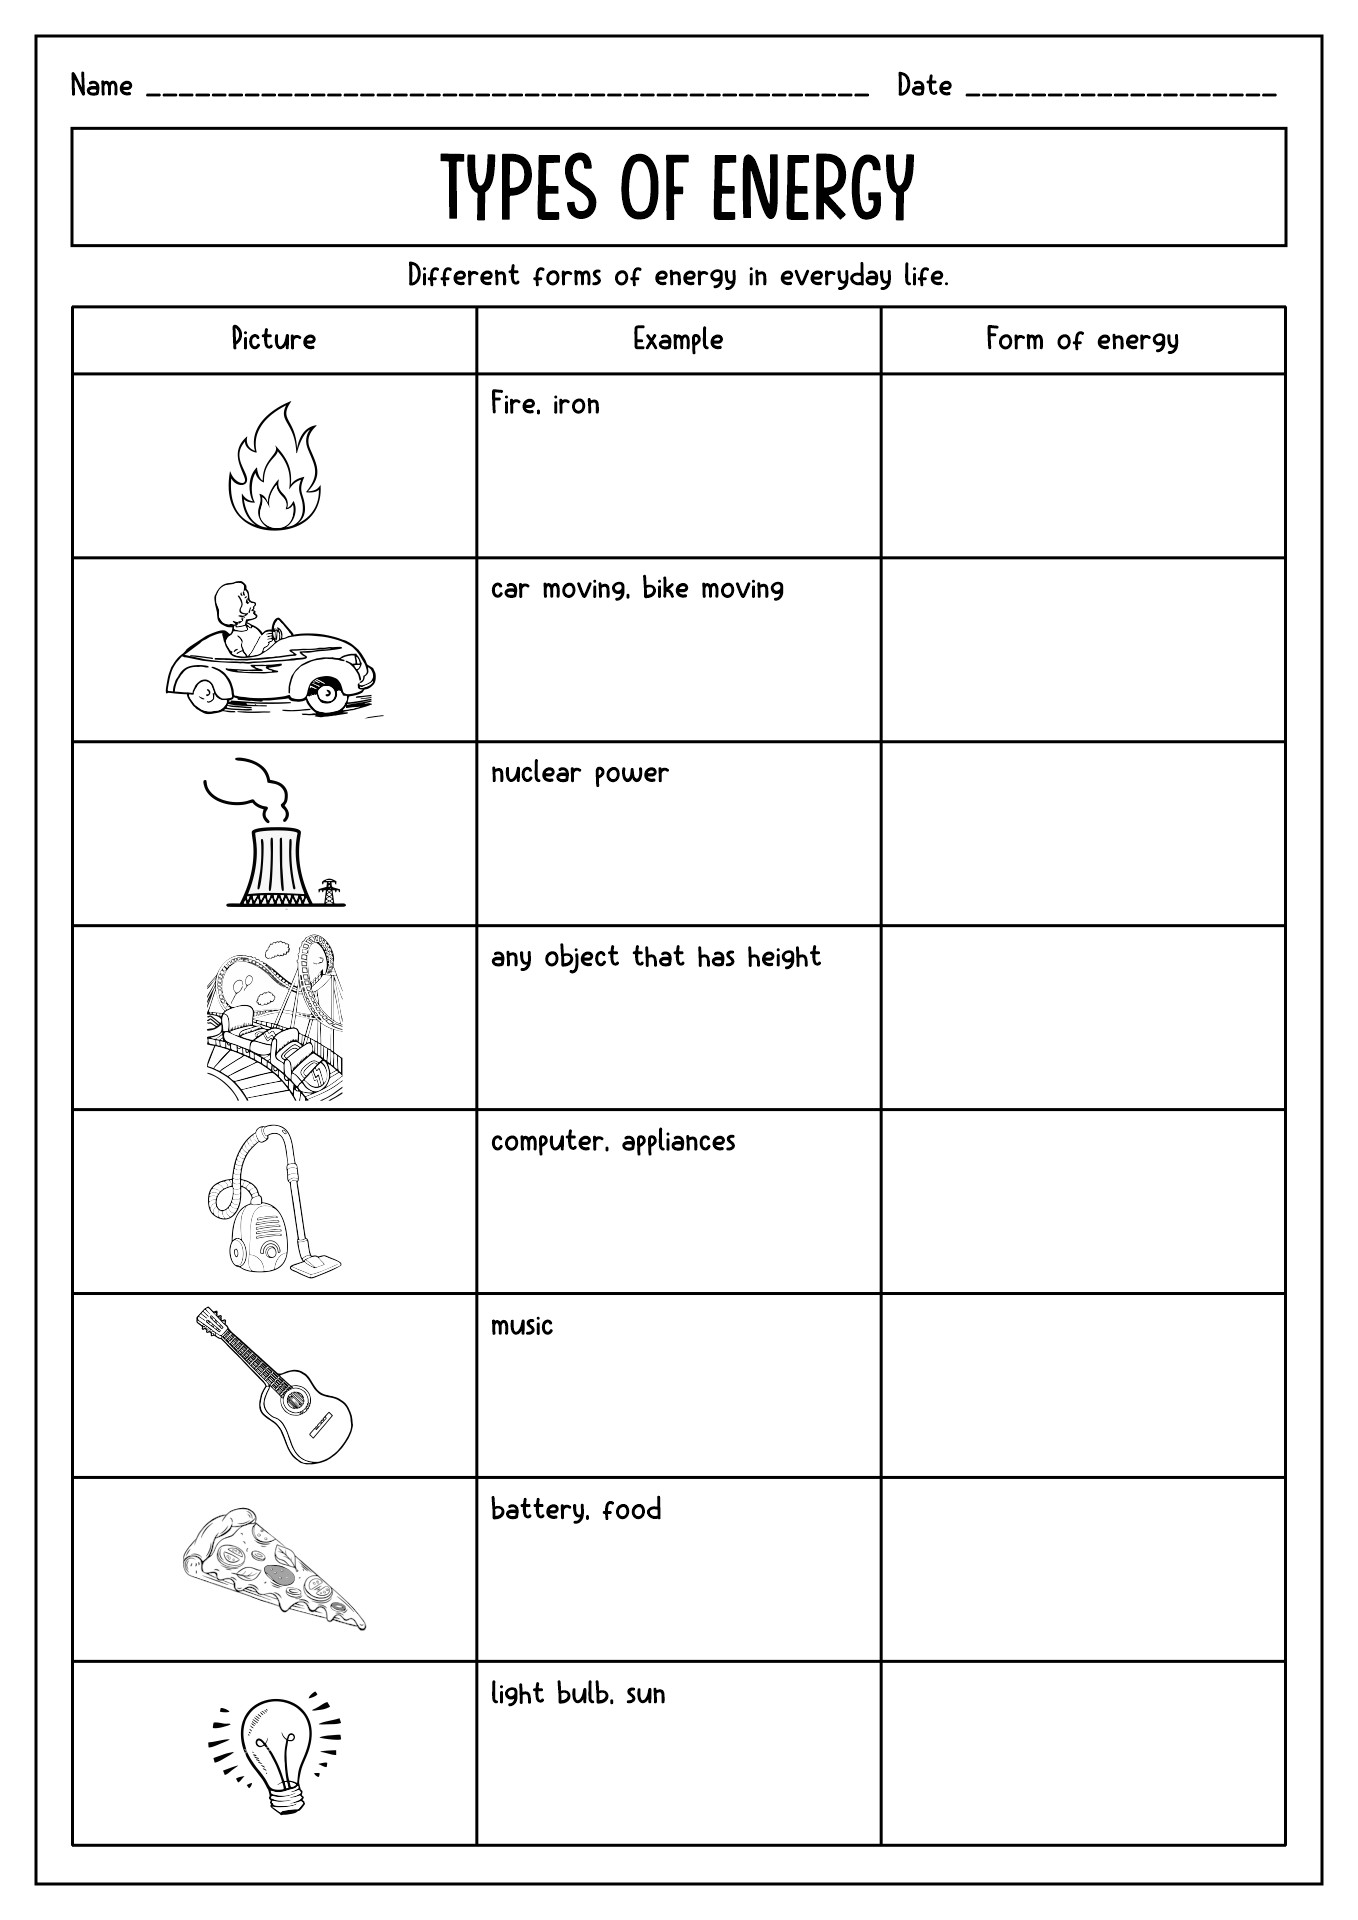 Types of Energy Science Worksheets Image